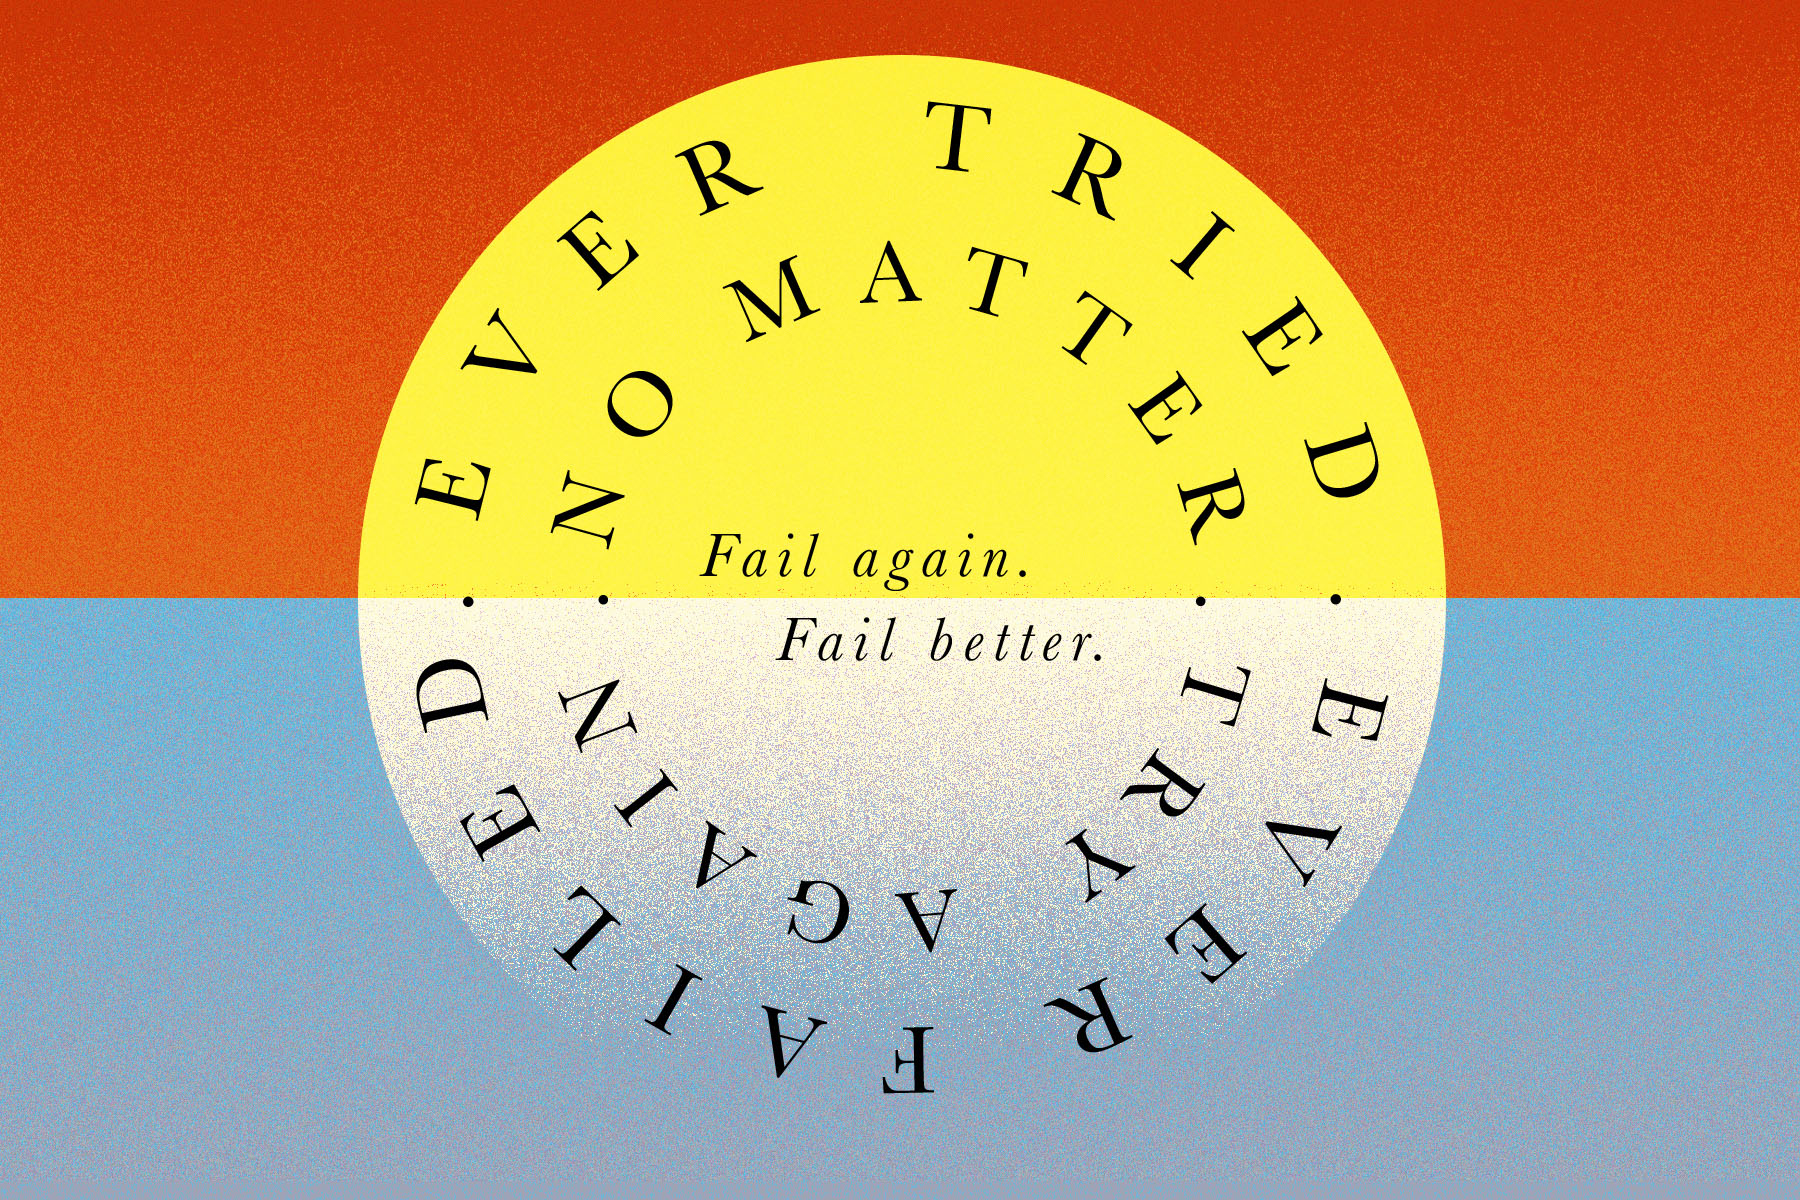 The words 'ever failed ever tried no matter try again' and 'fail again, fail better' on a yellow and white circle on a red and blue background